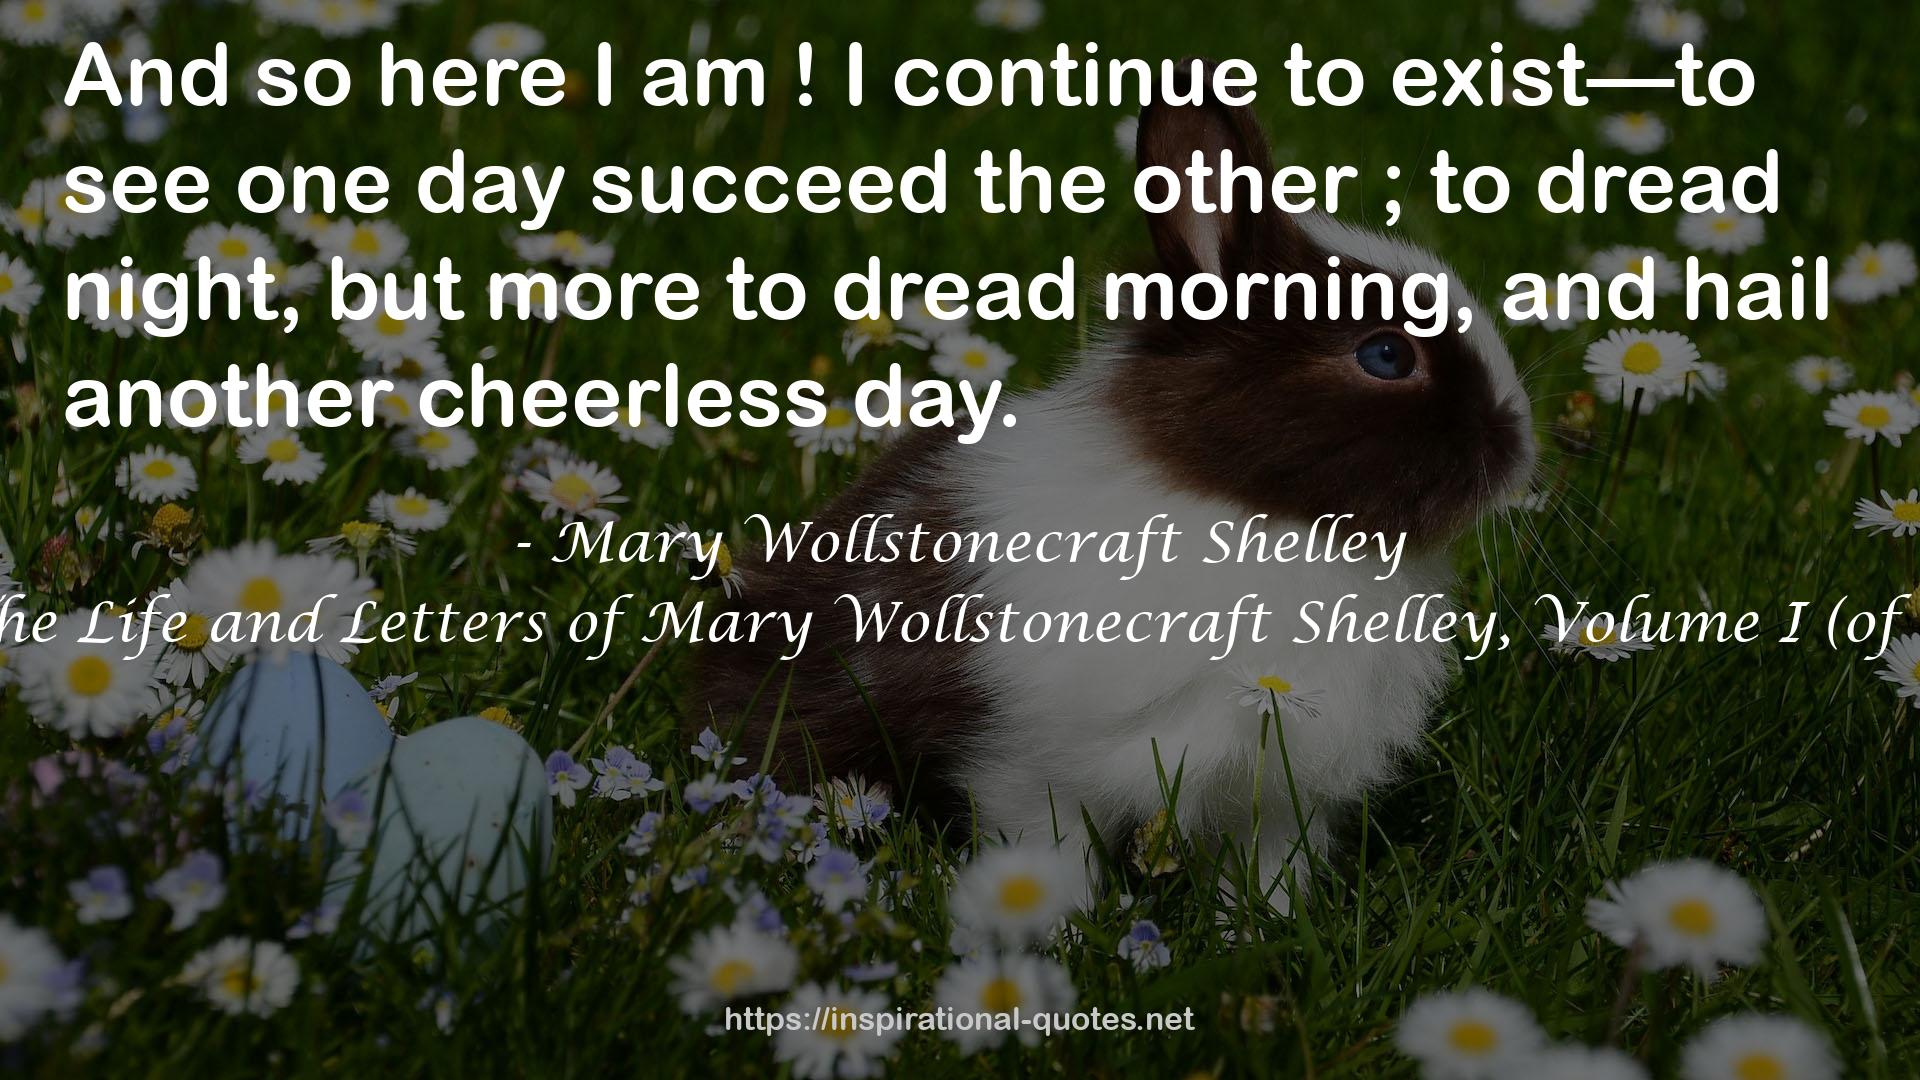 The Life and Letters of Mary Wollstonecraft Shelley, Volume I (of 2) QUOTES